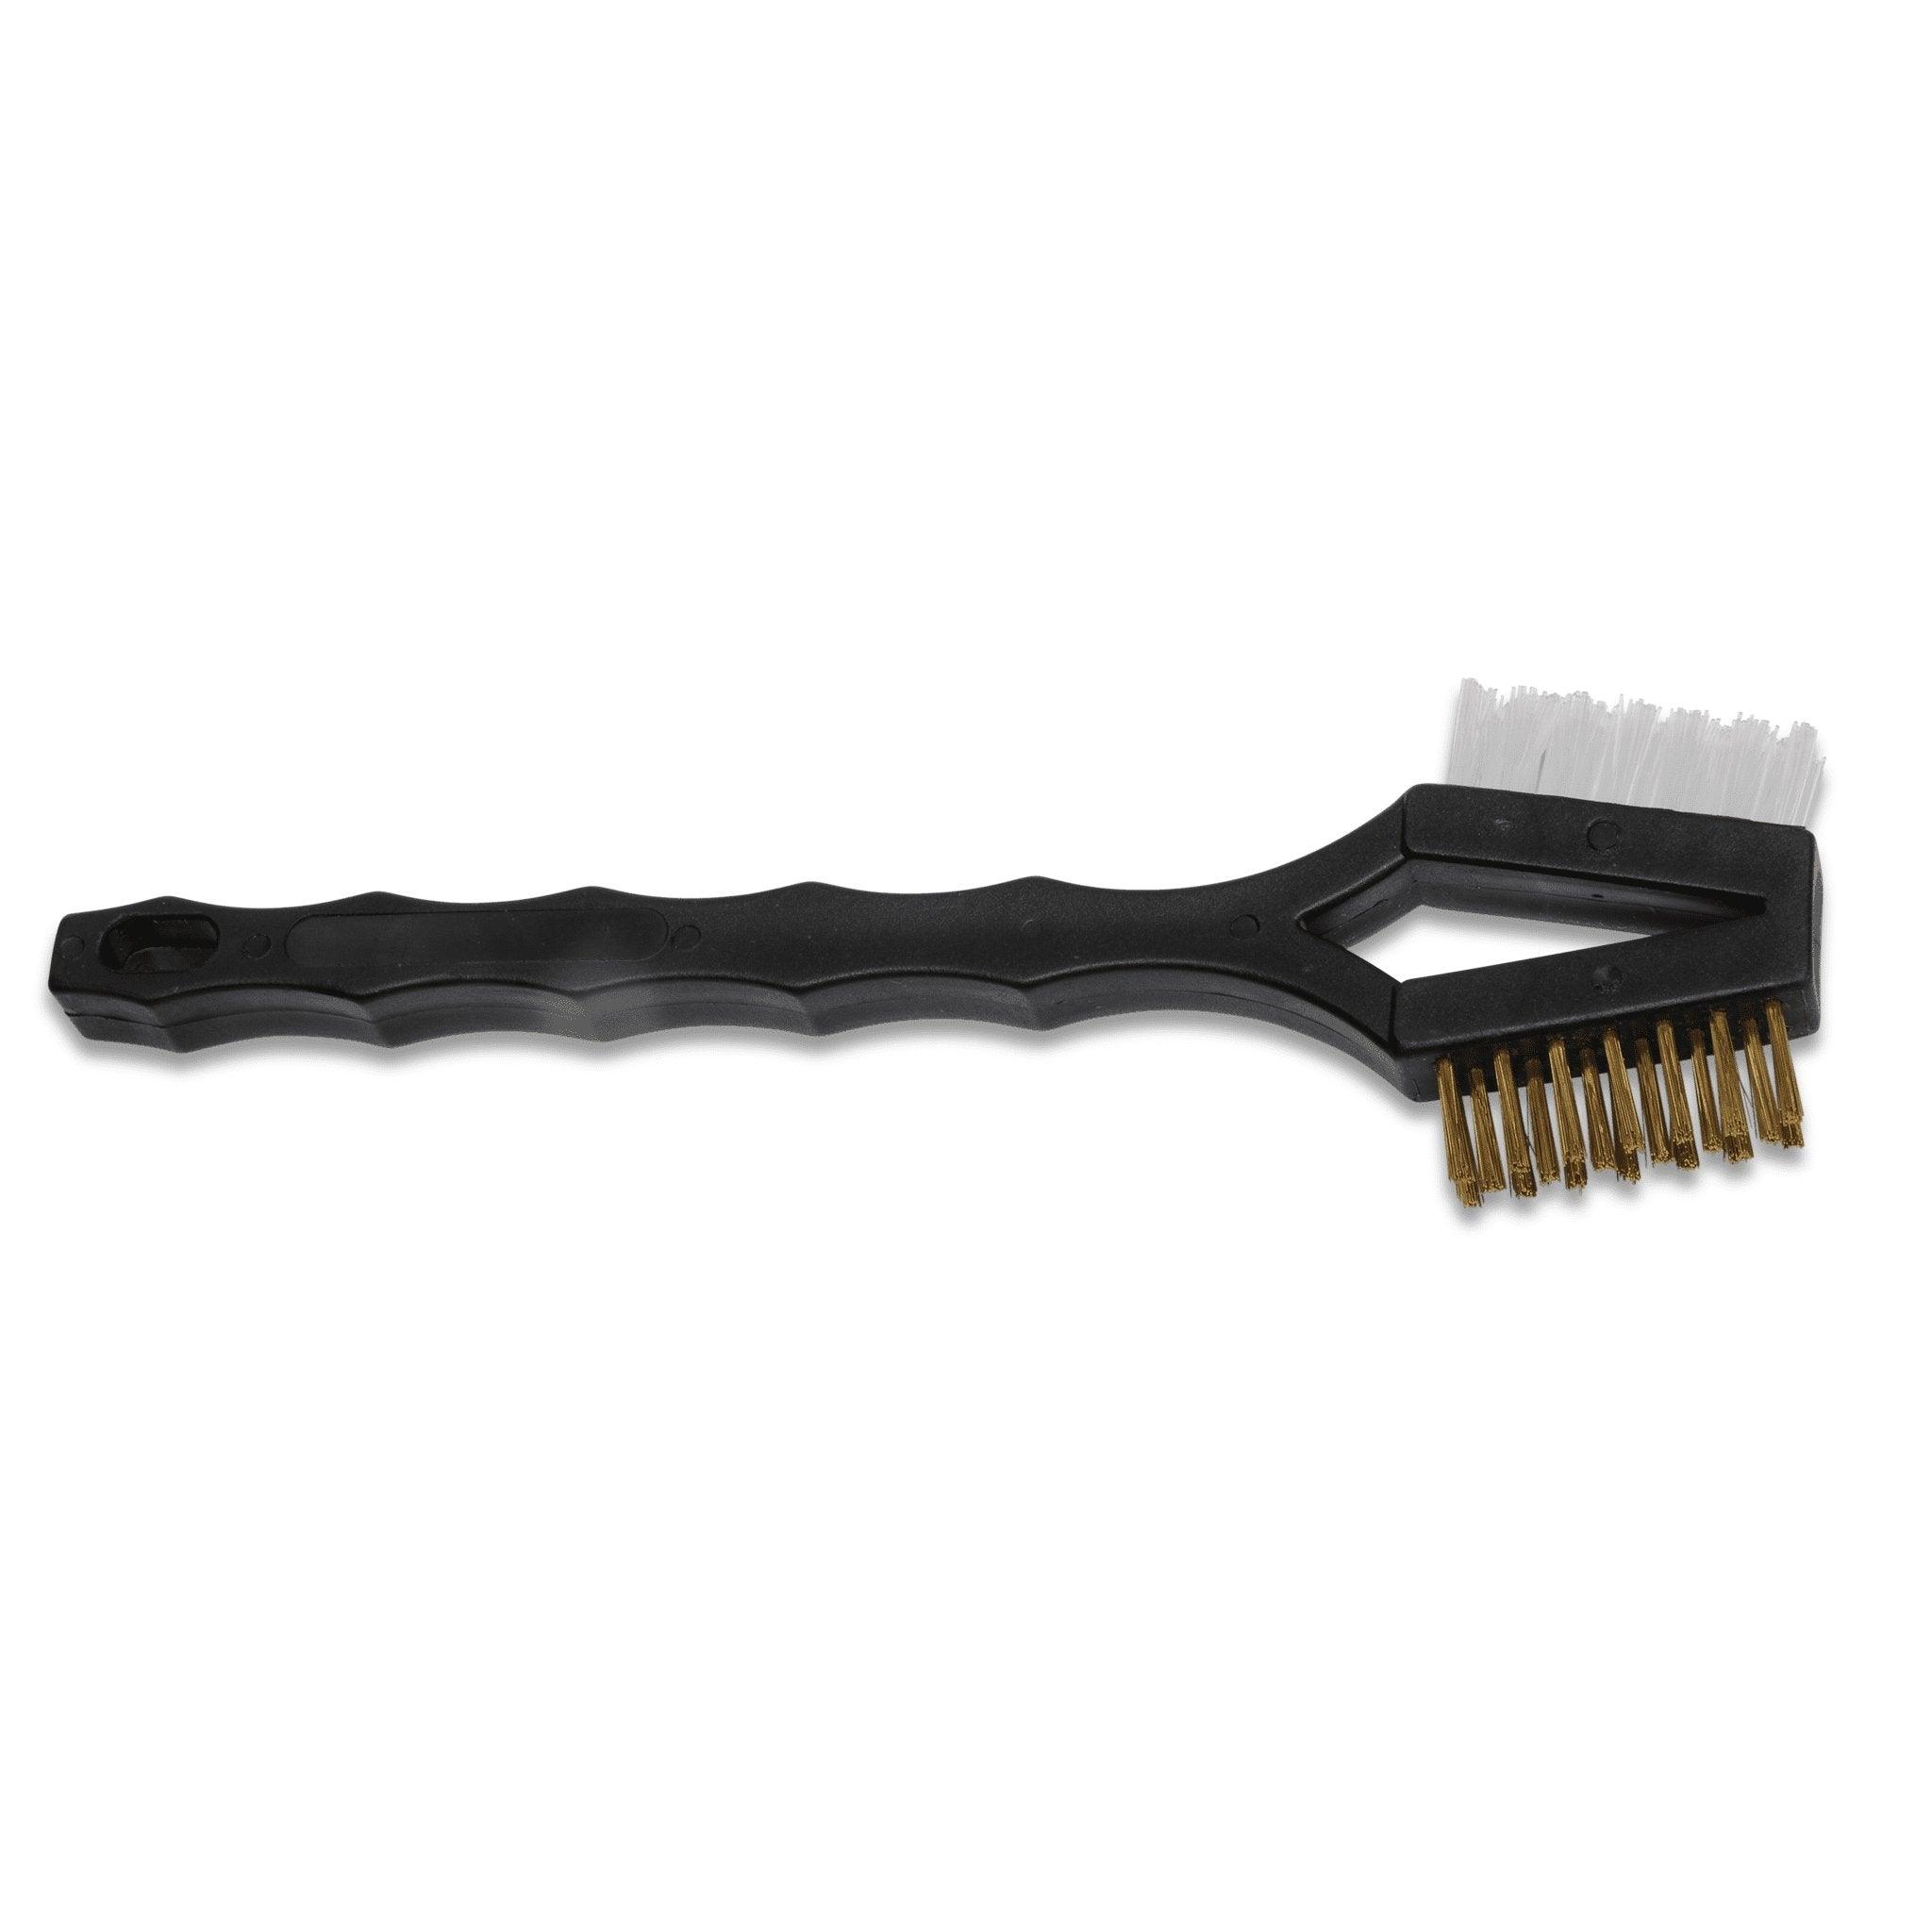 Double Sided Cleaning Brushes - Matuska Taxidermy Supply Company